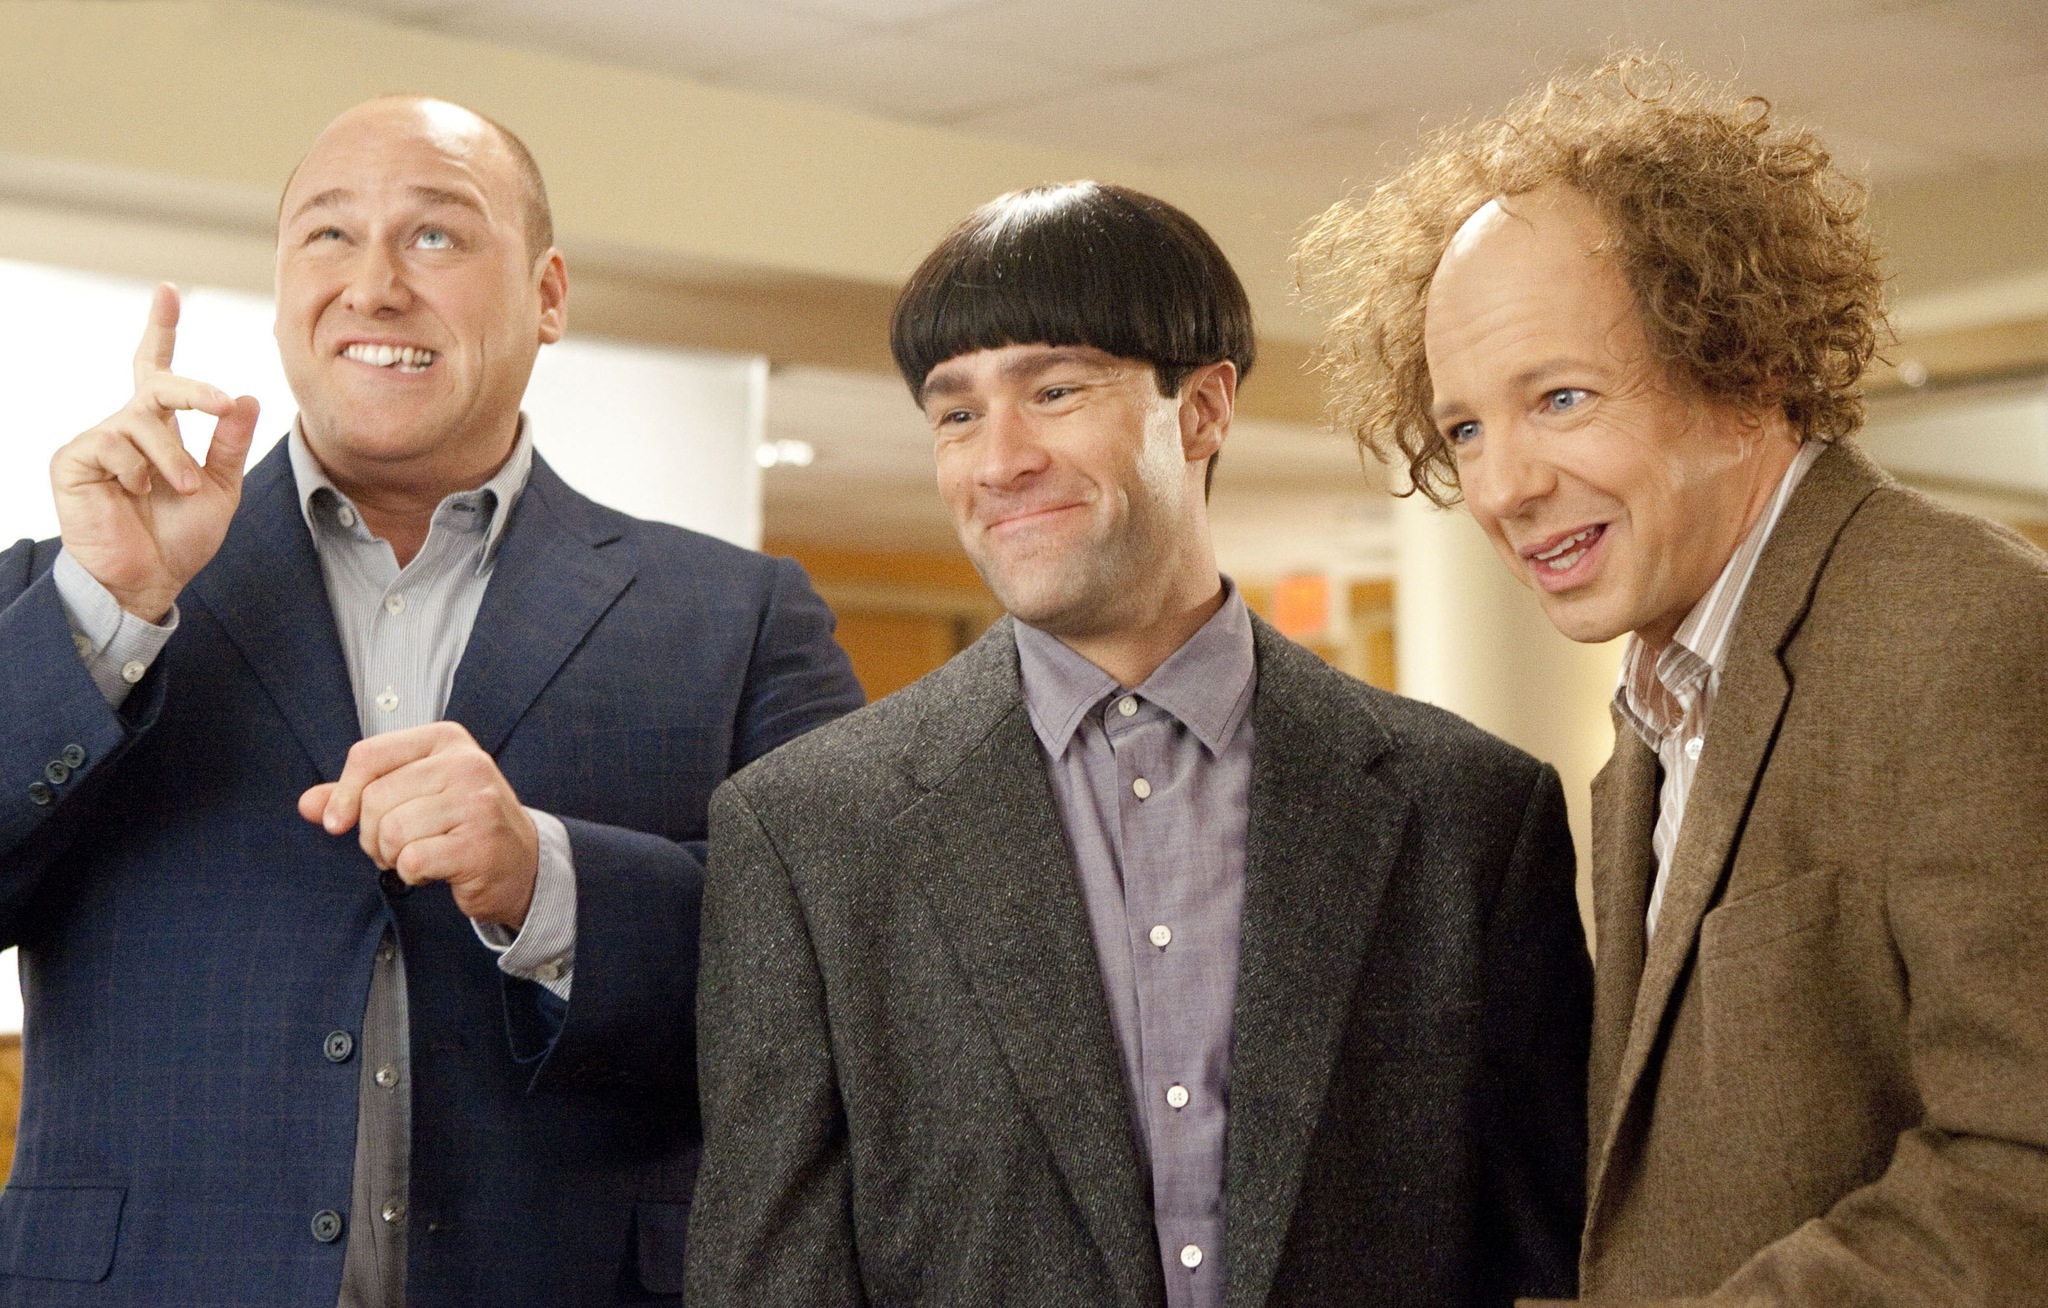 Still of Sean Hayes, Chris Diamantopoulos and Will Sasso in Trys veplos (2012)